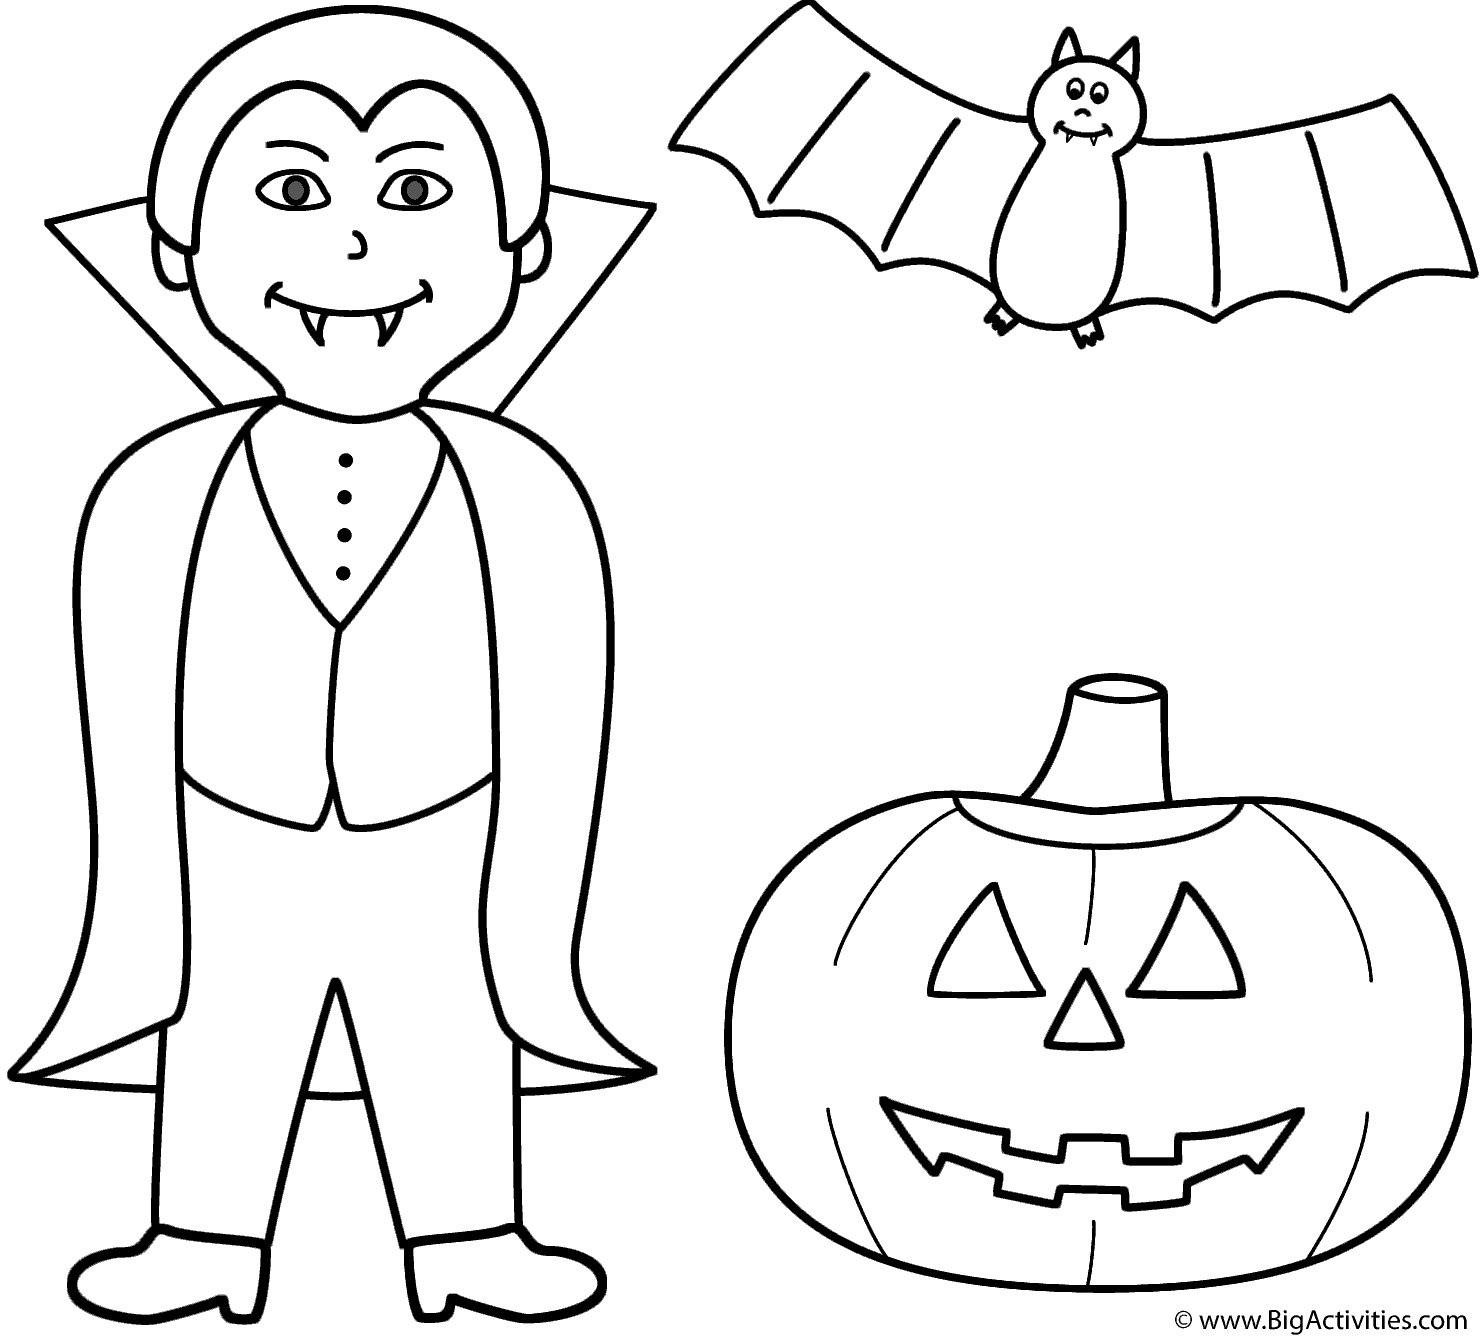 Download Vampire with pumpkin/jack-o-lantern and bat - Coloring Page (Halloween)